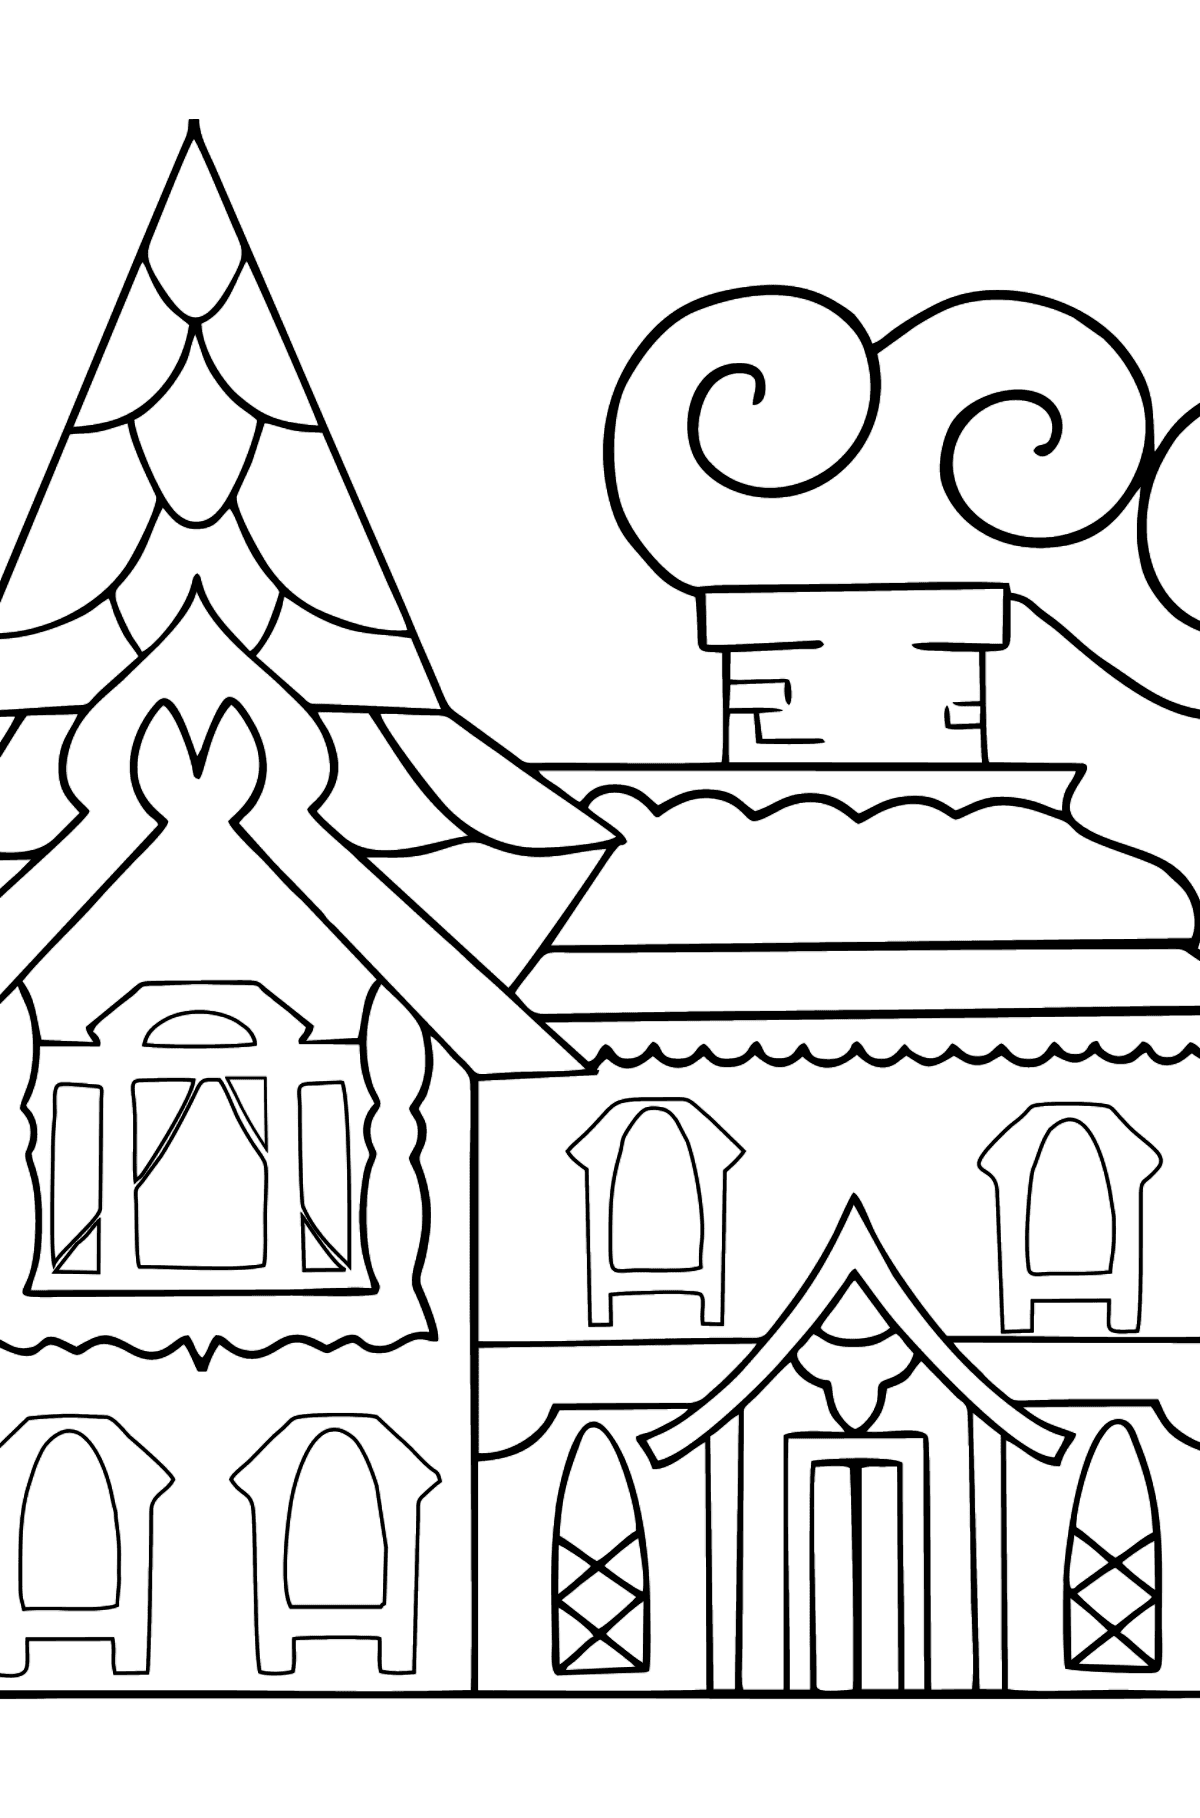 Simple Coloring Page - A House - A Kingdom of Storytellers - Coloring Pages for Kids